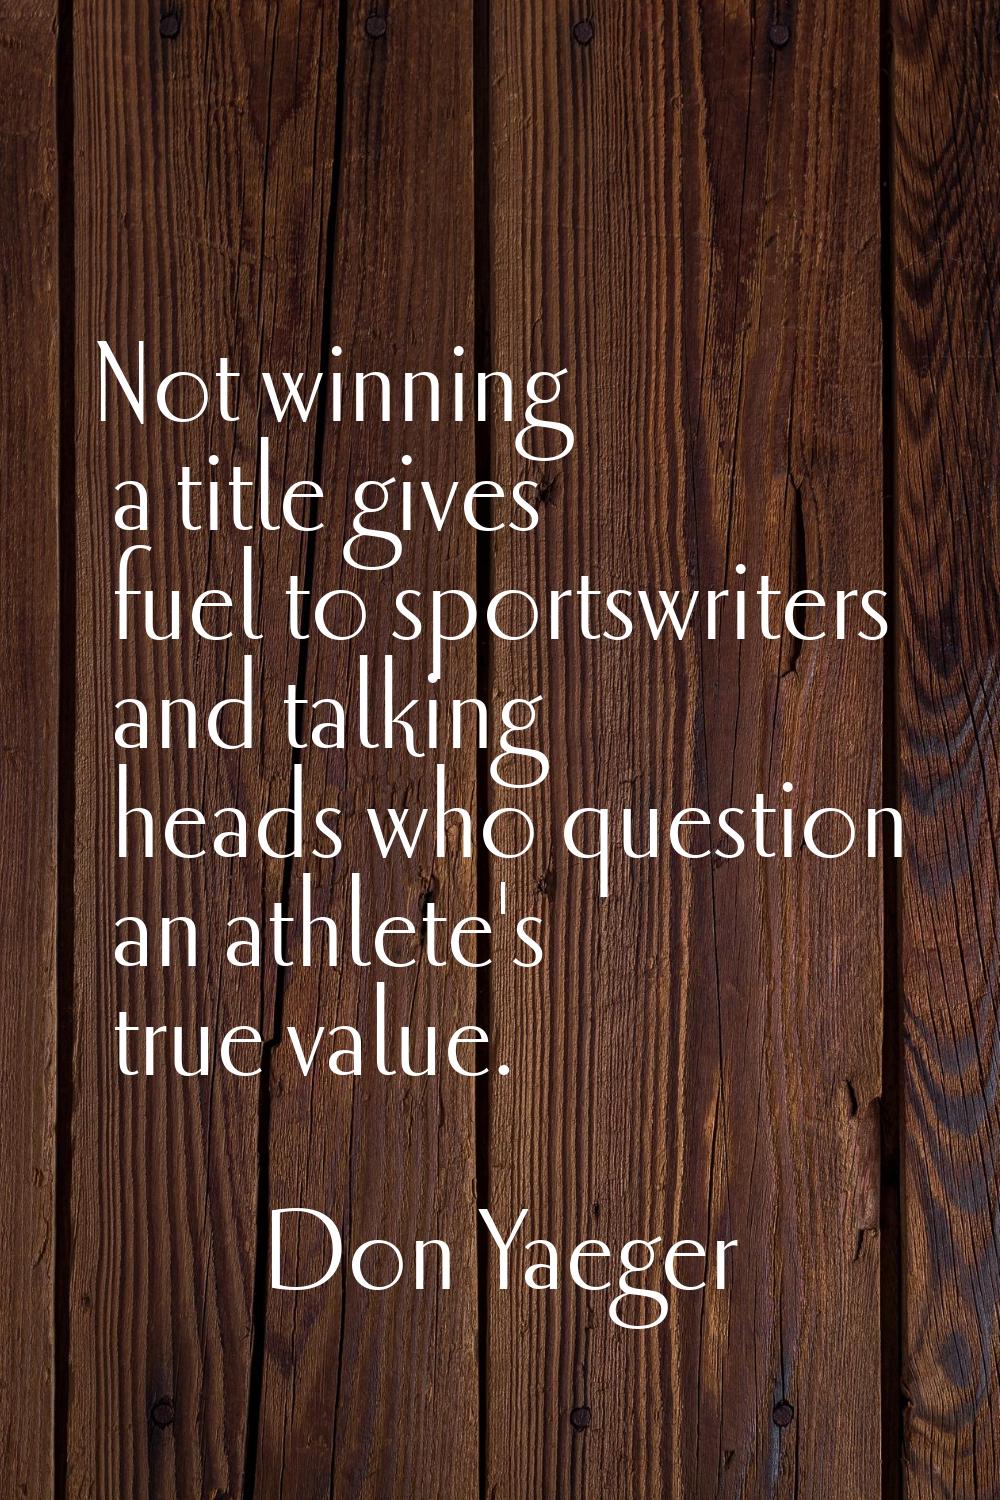 Not winning a title gives fuel to sportswriters and talking heads who question an athlete's true va